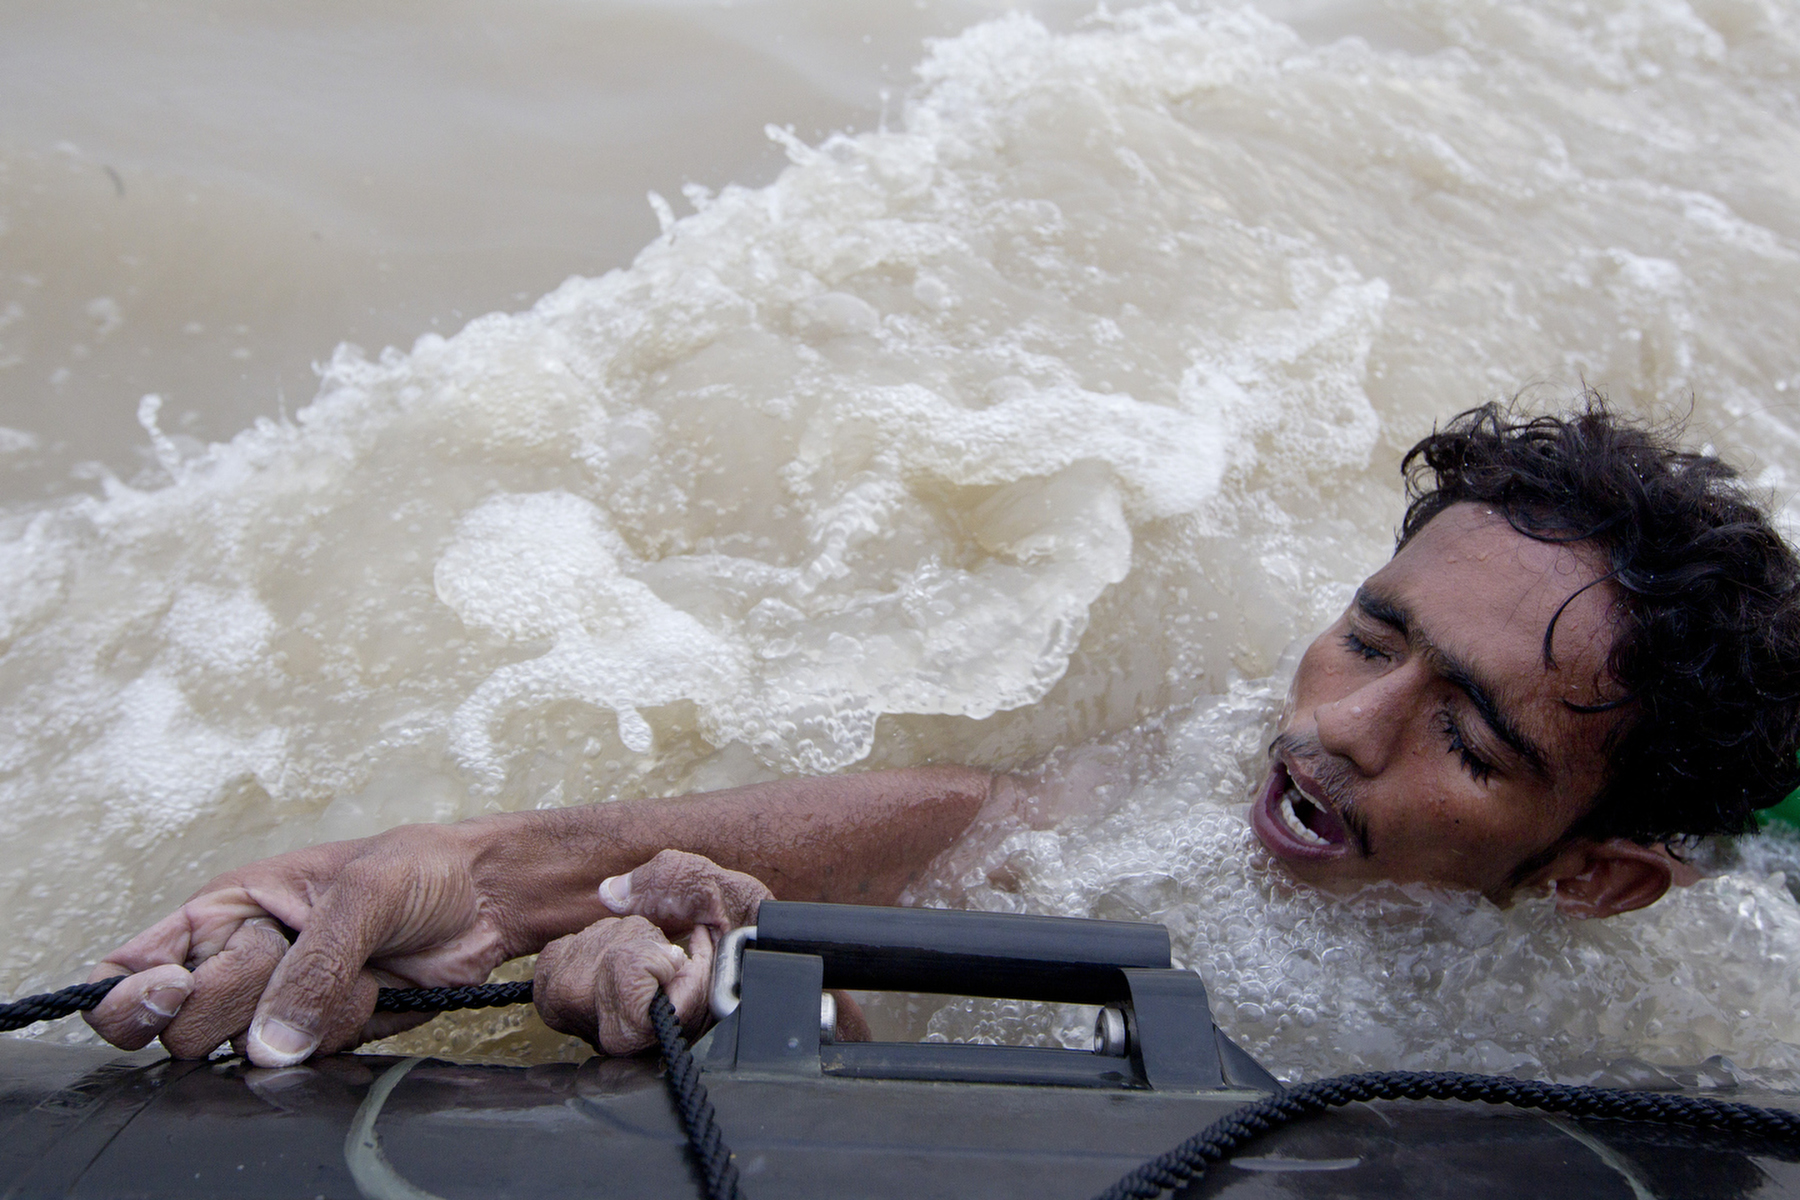 SUKKUR, PAKISTAN-AUG 10 : A Pakistan man holds on with all his strength as flood victims get evacuated by the Pakistan Navy on a boat rescue mission as flood waters continue at a very high level August 10, 2010 in Sukkur, Pakistan. Pakistan is suffering from the worst flooding in 80 years as the army and aid organizations struggle to cope with the scope of the wide spread disaster which has killed atleast 1,500 people and displaced millions. In addition, Pakistani\'s have become more frustrated with the government\'s repsonse along with President Asif Ali Zardari trip to Europe as Islamic charities step up to gain local grass roots support as they did in the 2005 earthquake.(Photo by Paula Bronstein/ Getty Images)WASHED AWAY_PAKISTAN FLOODS